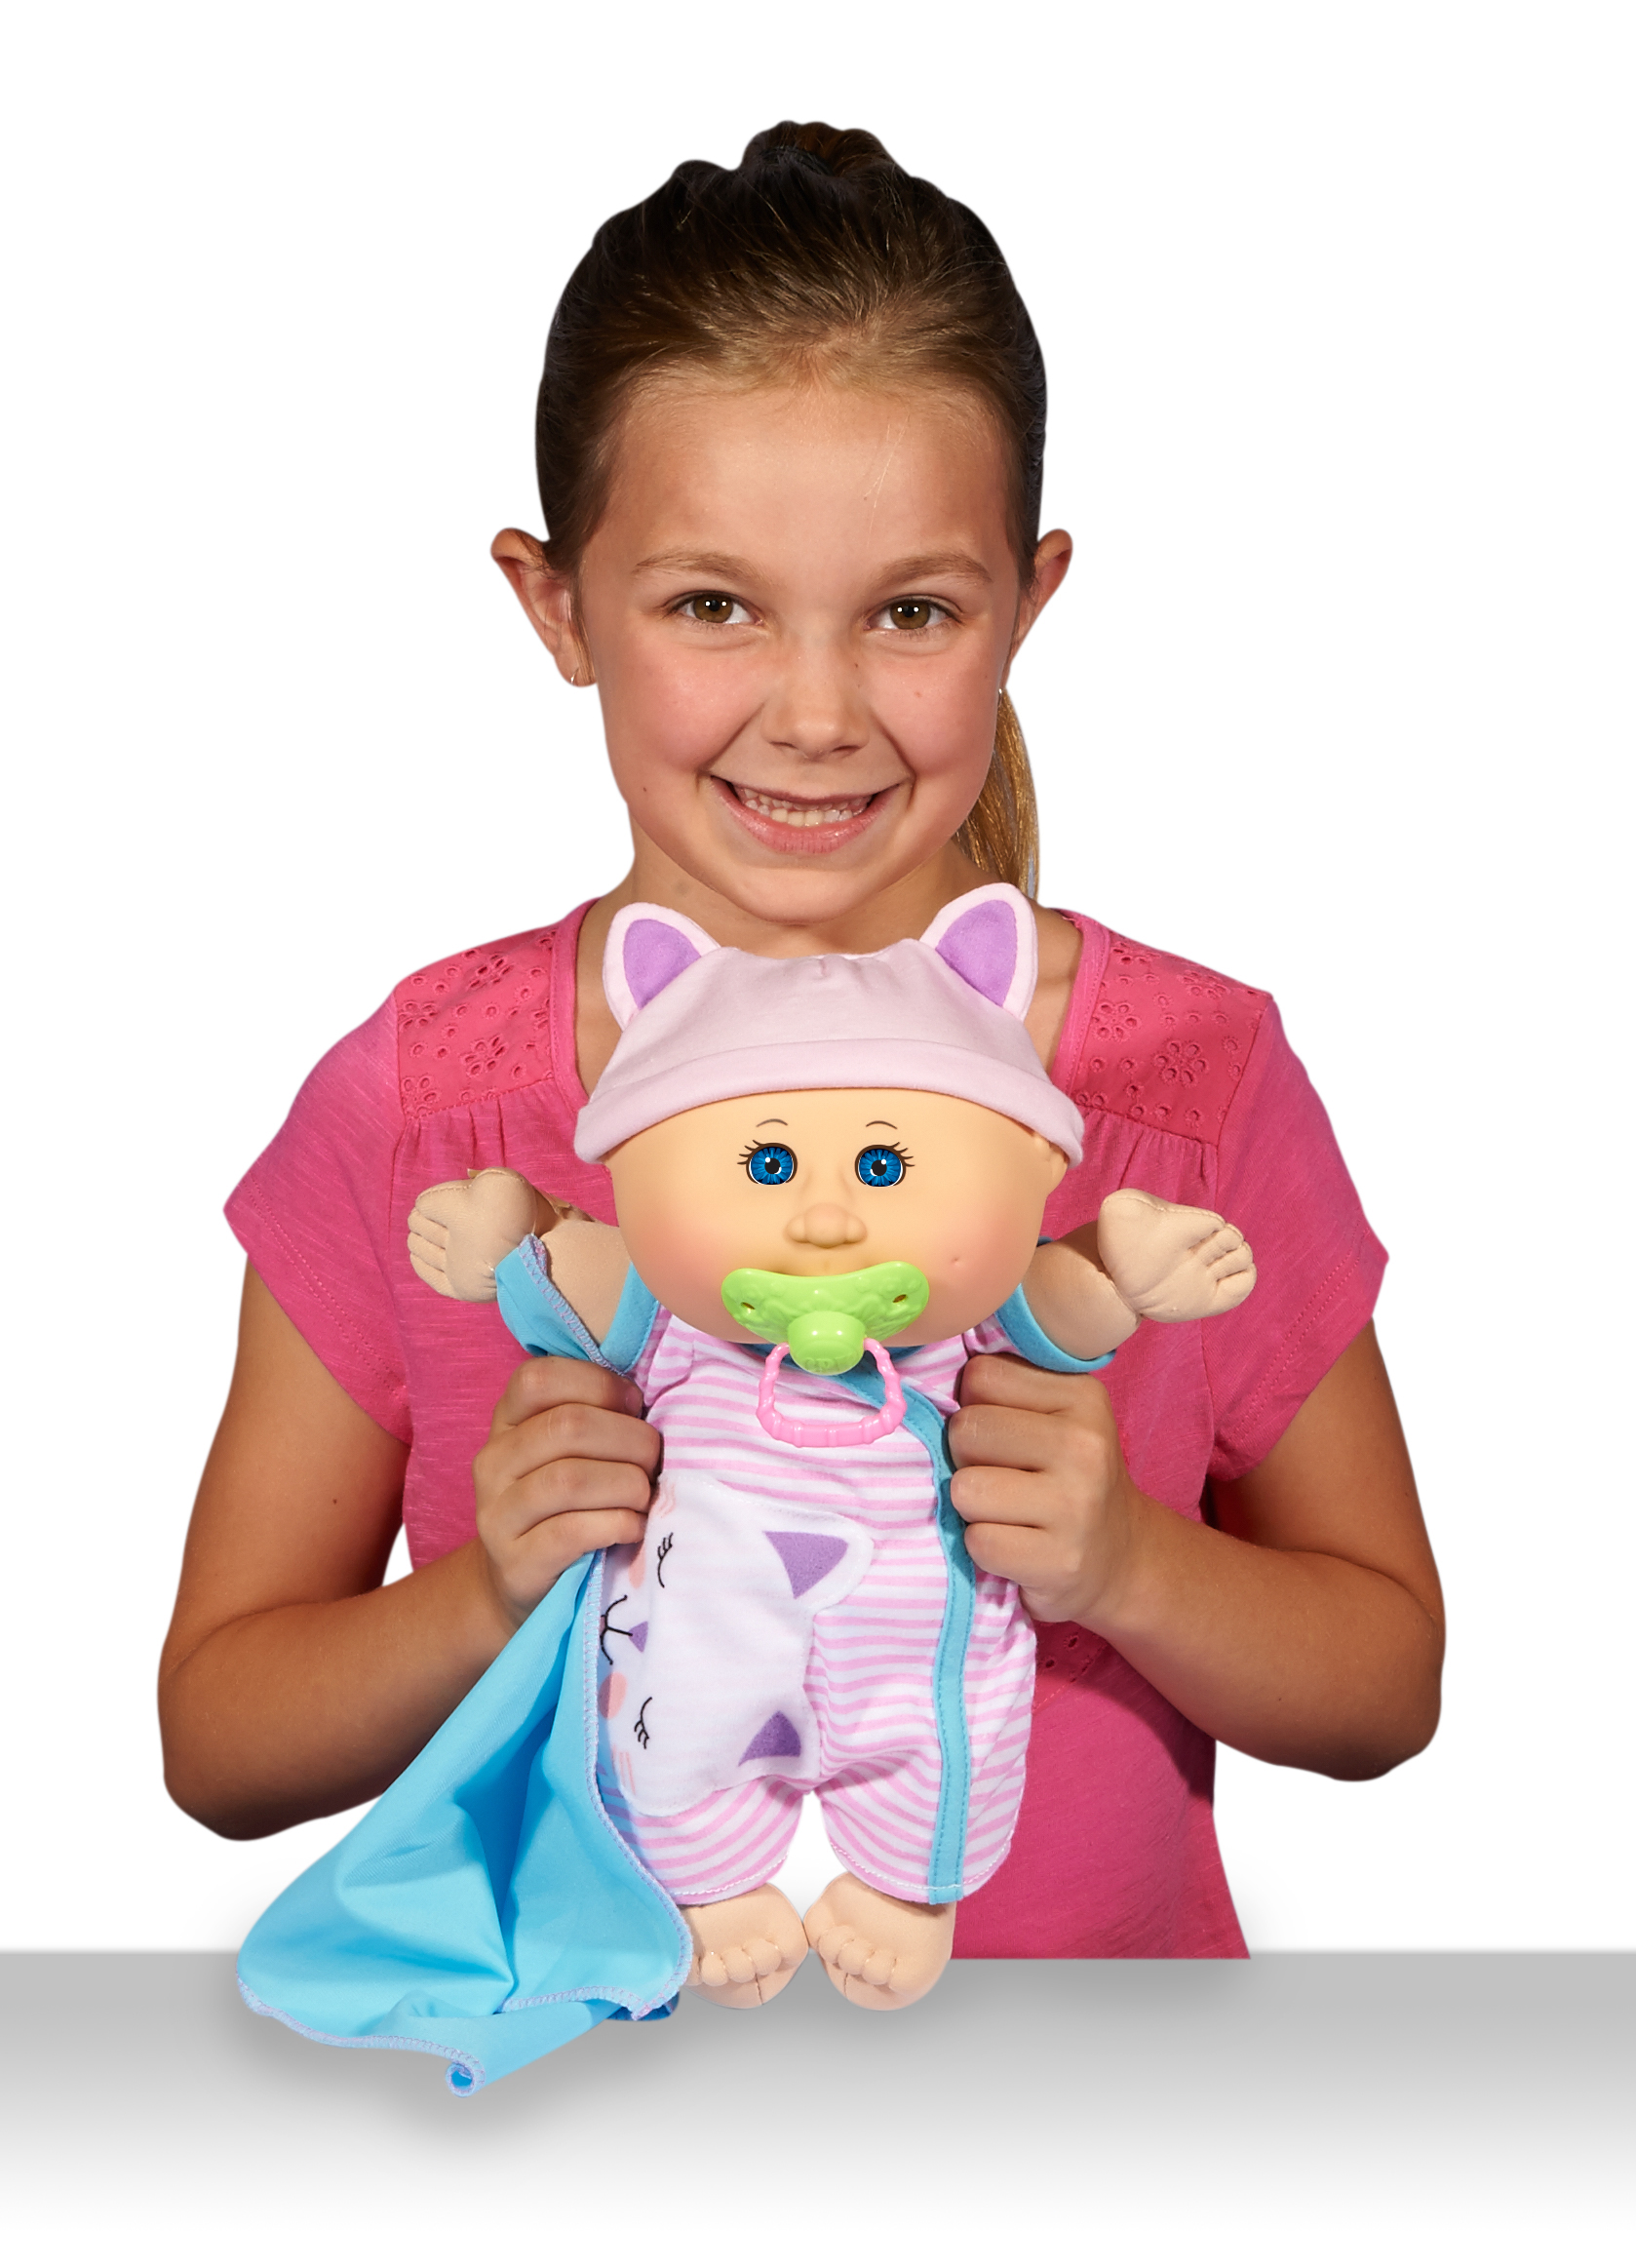 Cabbage Patch Kids Naptime Babies Doll, Bald/Blue Eye Girl - image 3 of 3